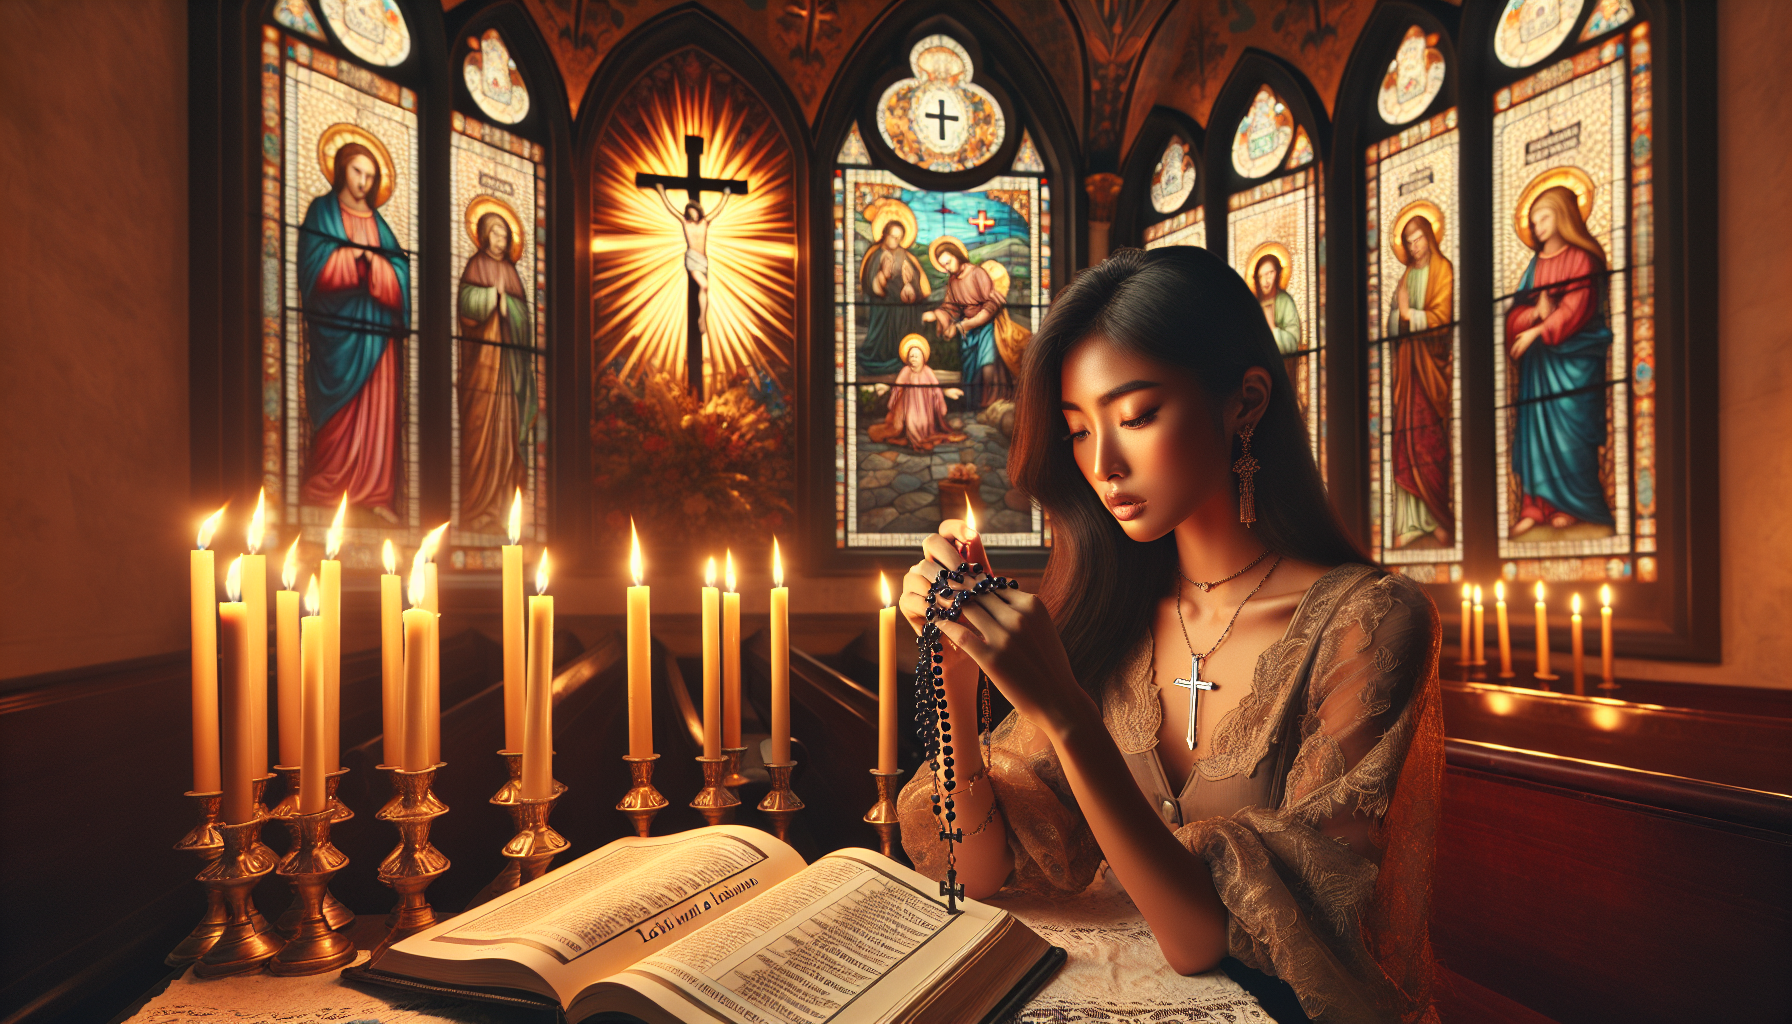 �Create a serene and peaceful image of a person praying in a beautiful, candle-lit chapel. The focus should be on their hands gently holding a rosary and an open prayer book with the title “Letanía de